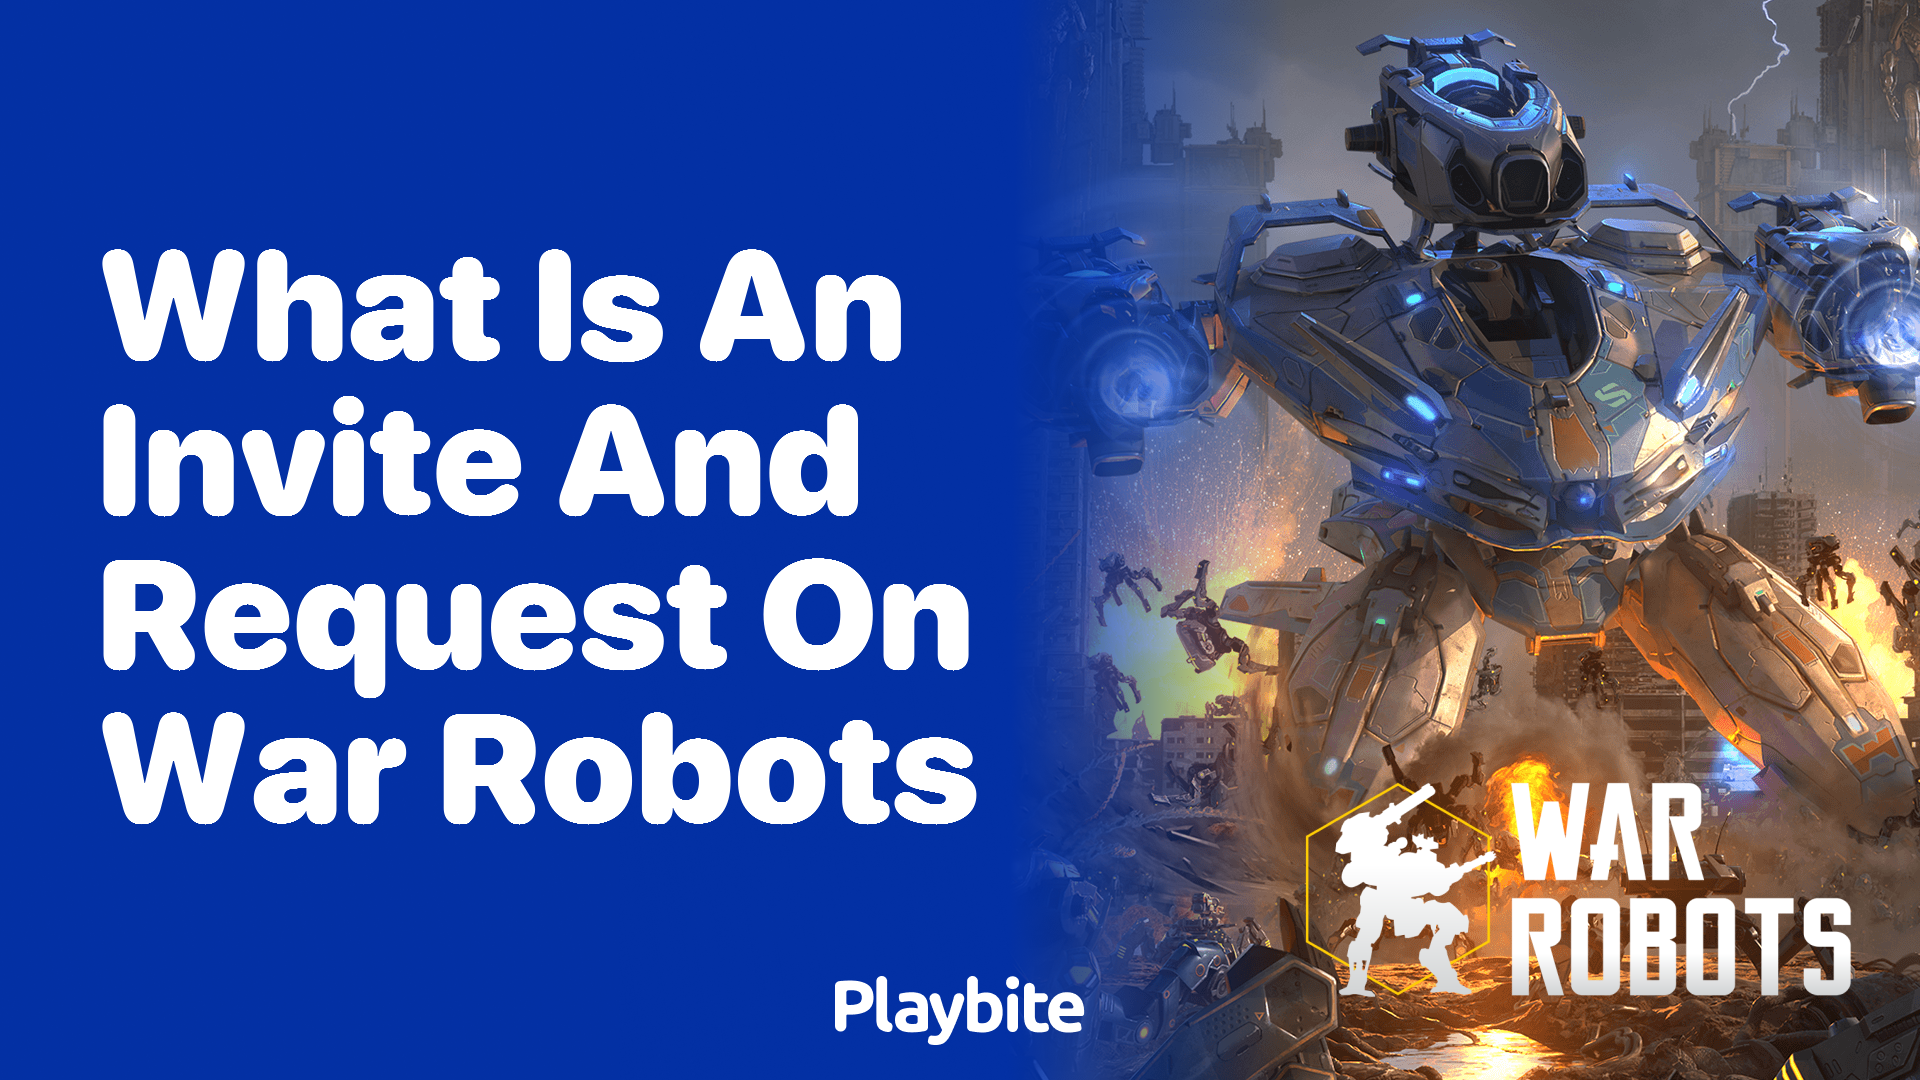 What is an Invite and Request on War Robots?